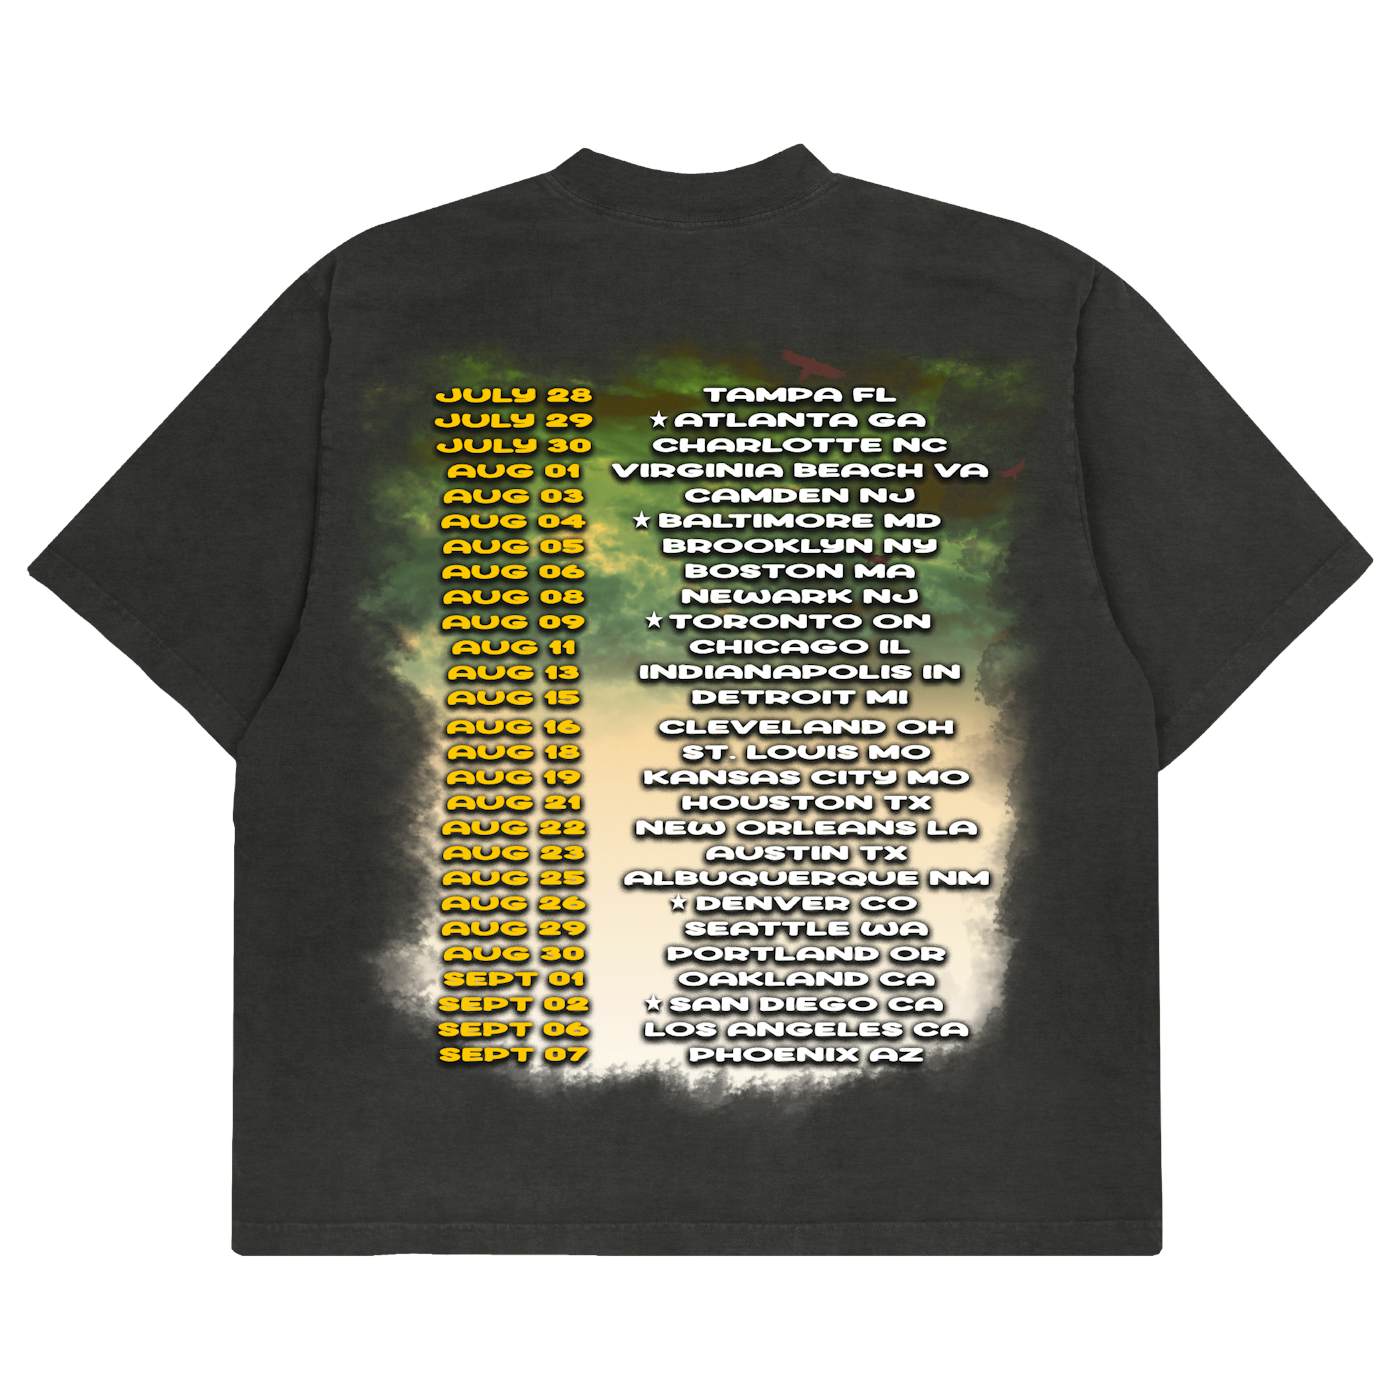 Lil Durk SORRY FOR THE DROUGHT TOUR T-SHIRT BLACK